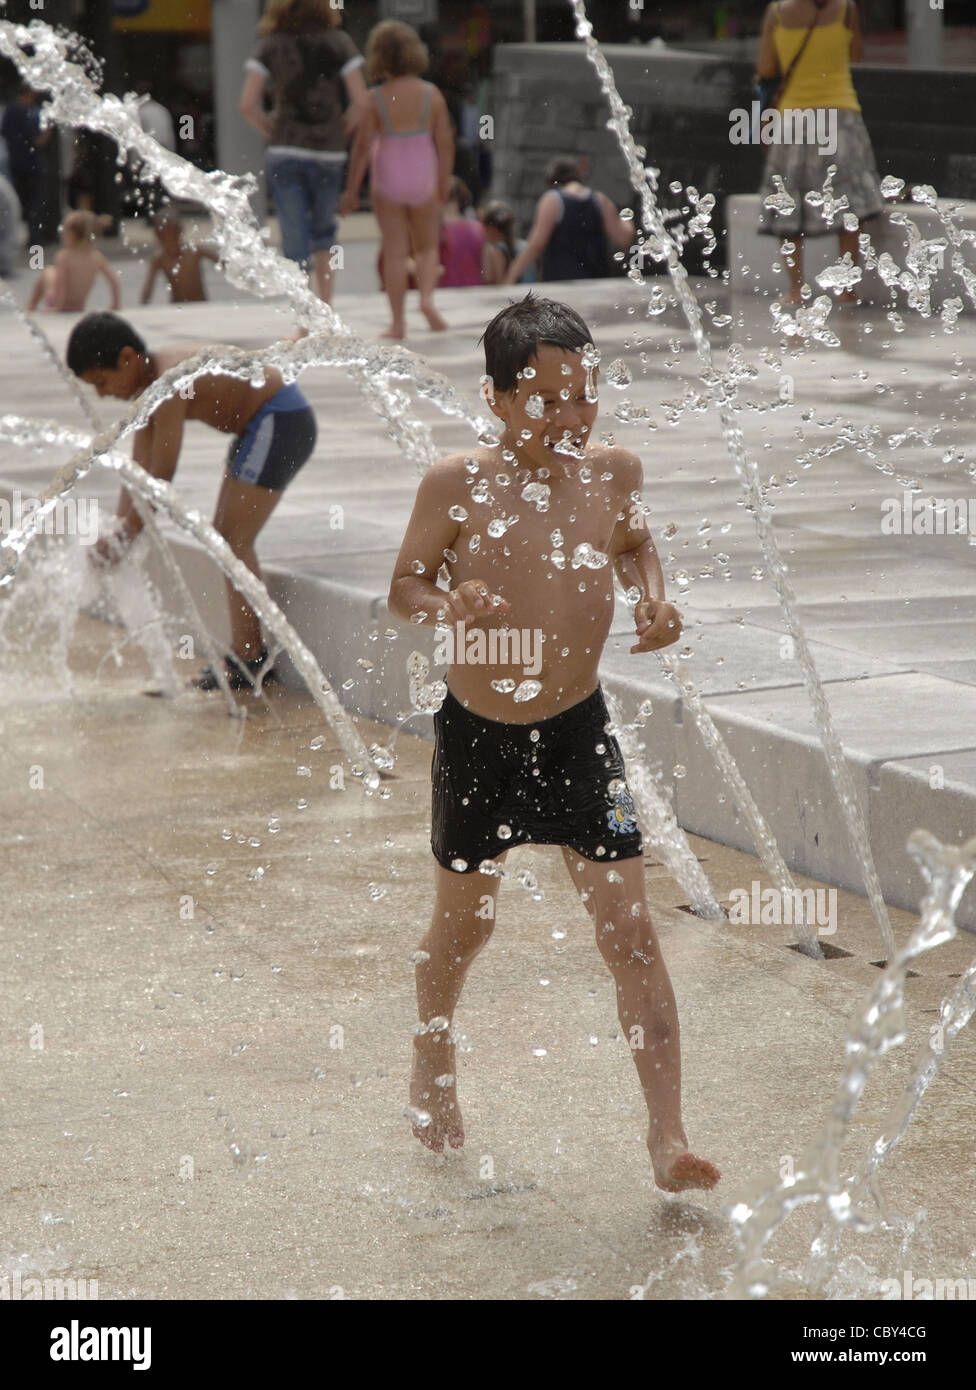 Children playing in water fountains during a hot day in Nottingham, UK. These fun water jets are situated in City Square. Stock Photo